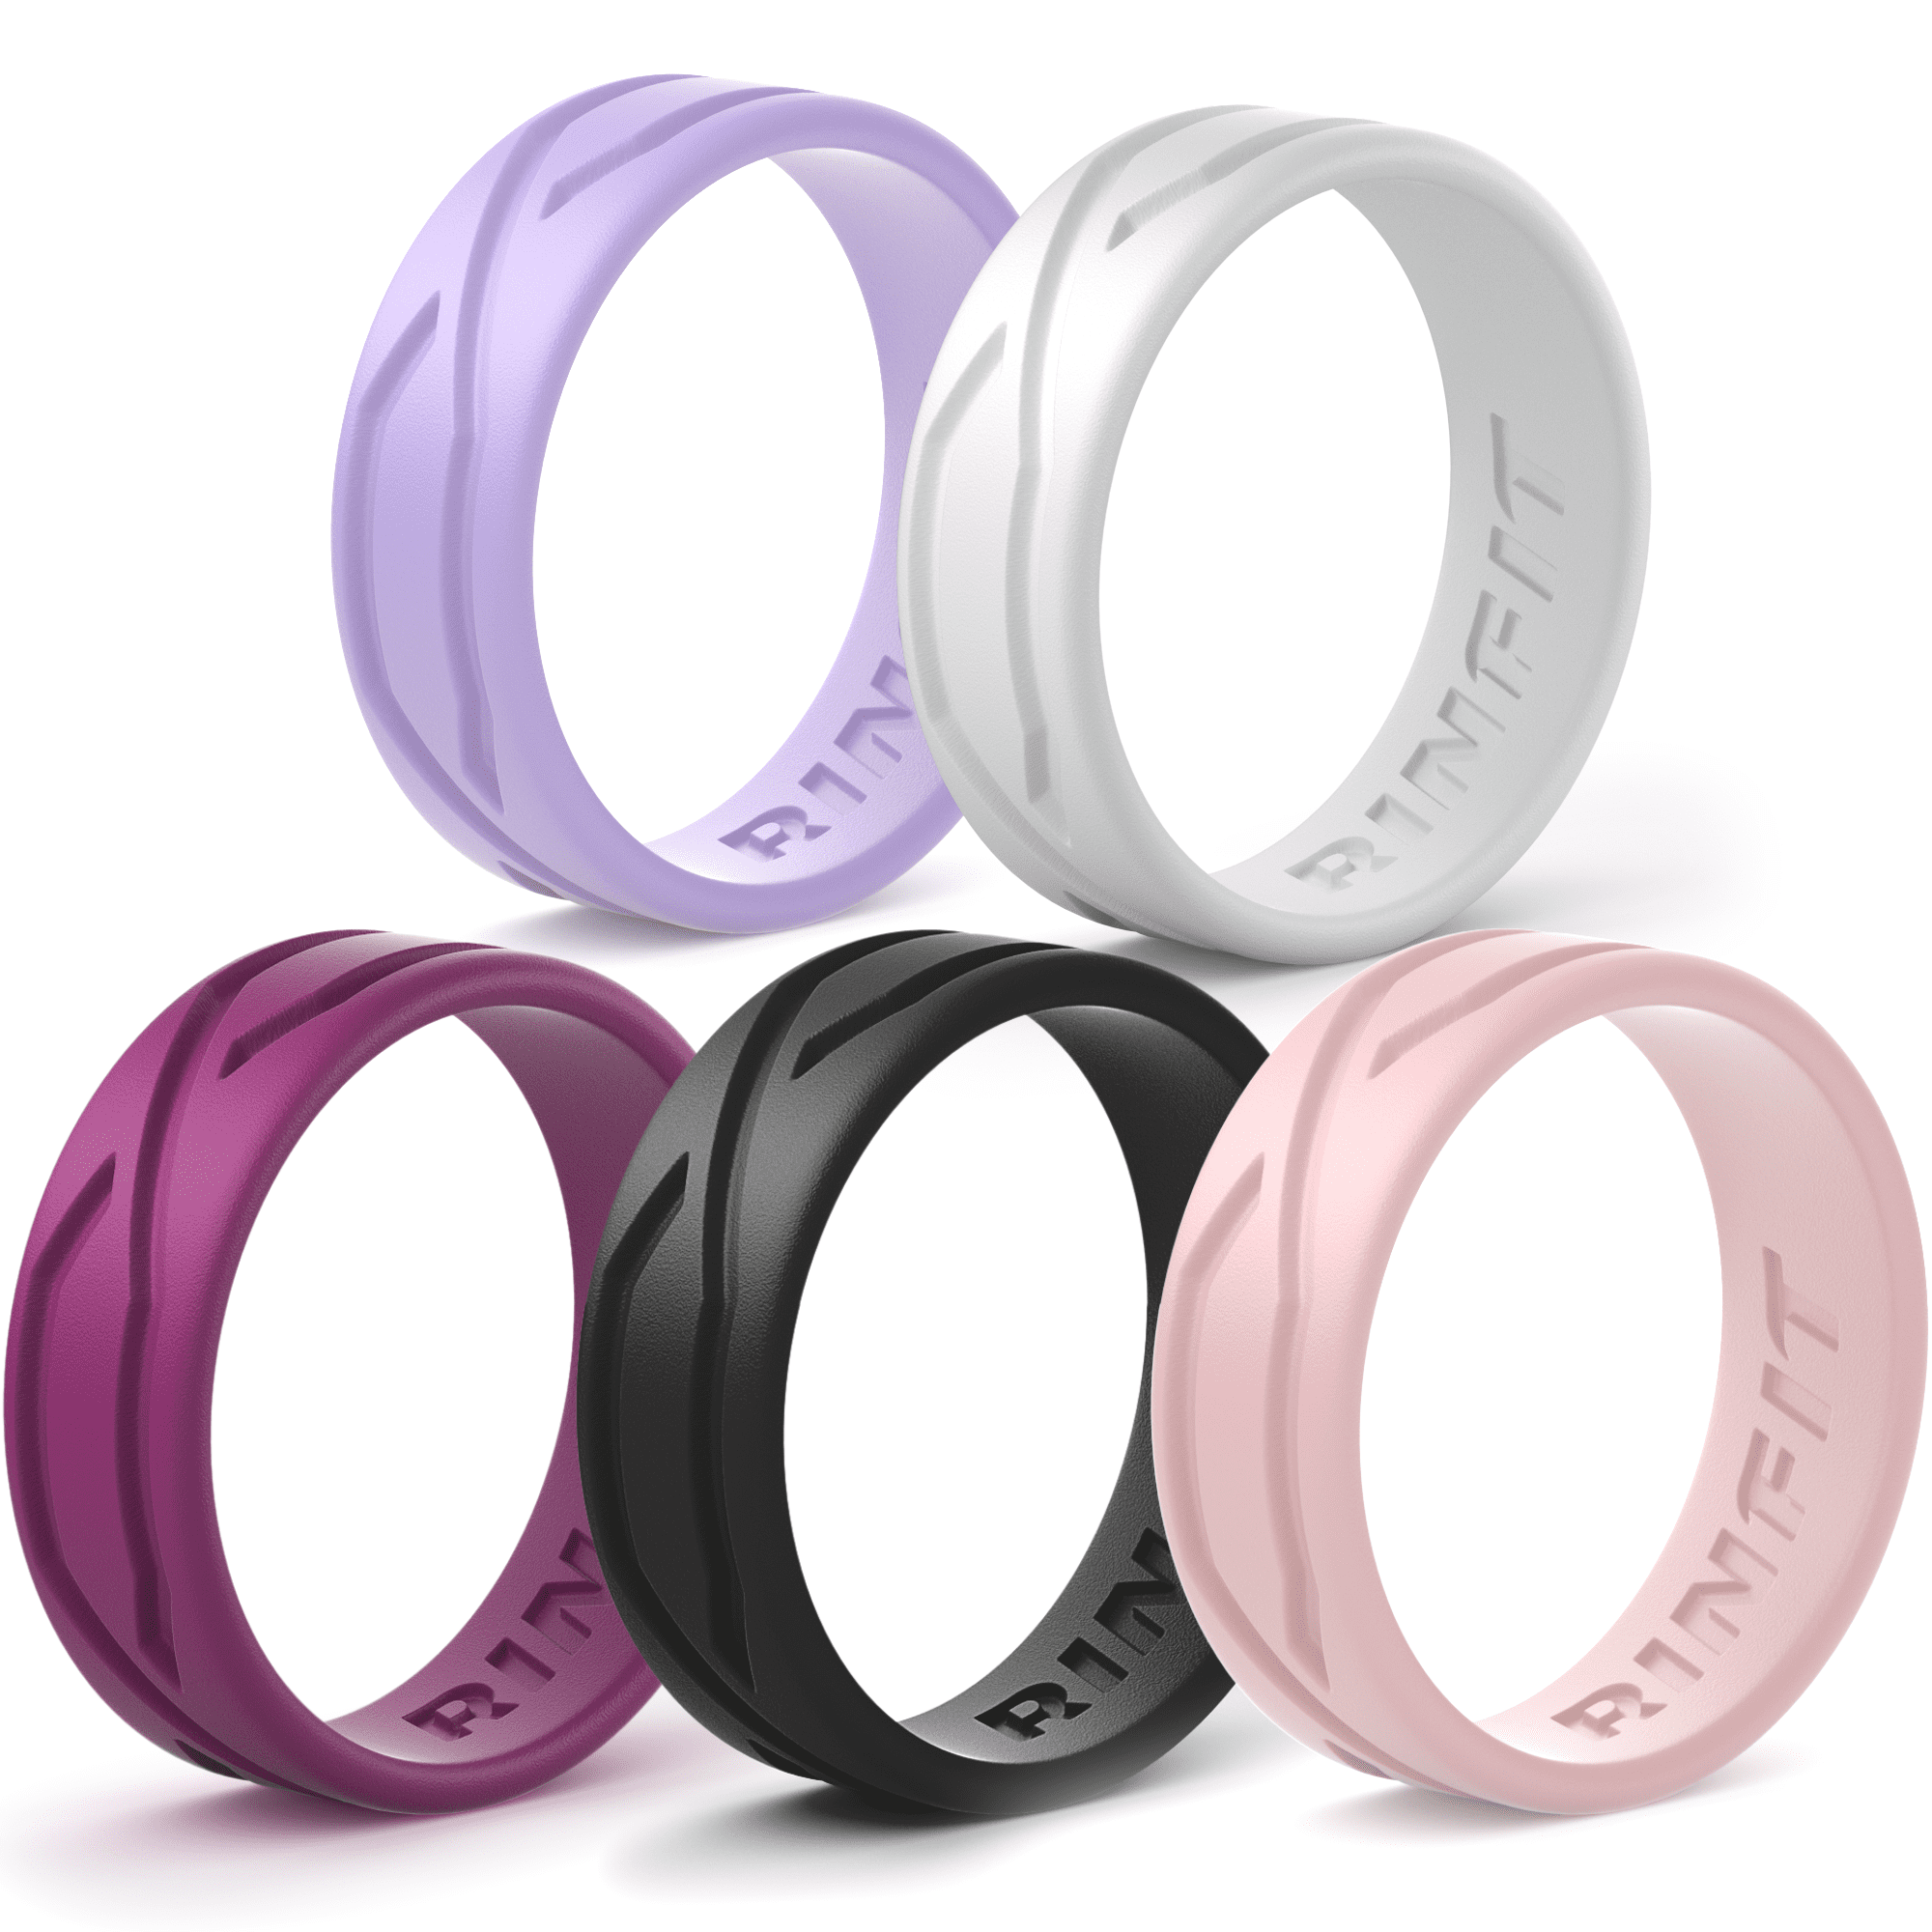 Pro-Athletic Ring & Kauai Elegance Rings Collection Silicone Wedding Ring for Women from The Latest Artist Design Innovations to Leading-Edge Comfort KAUAI Leading Brand 